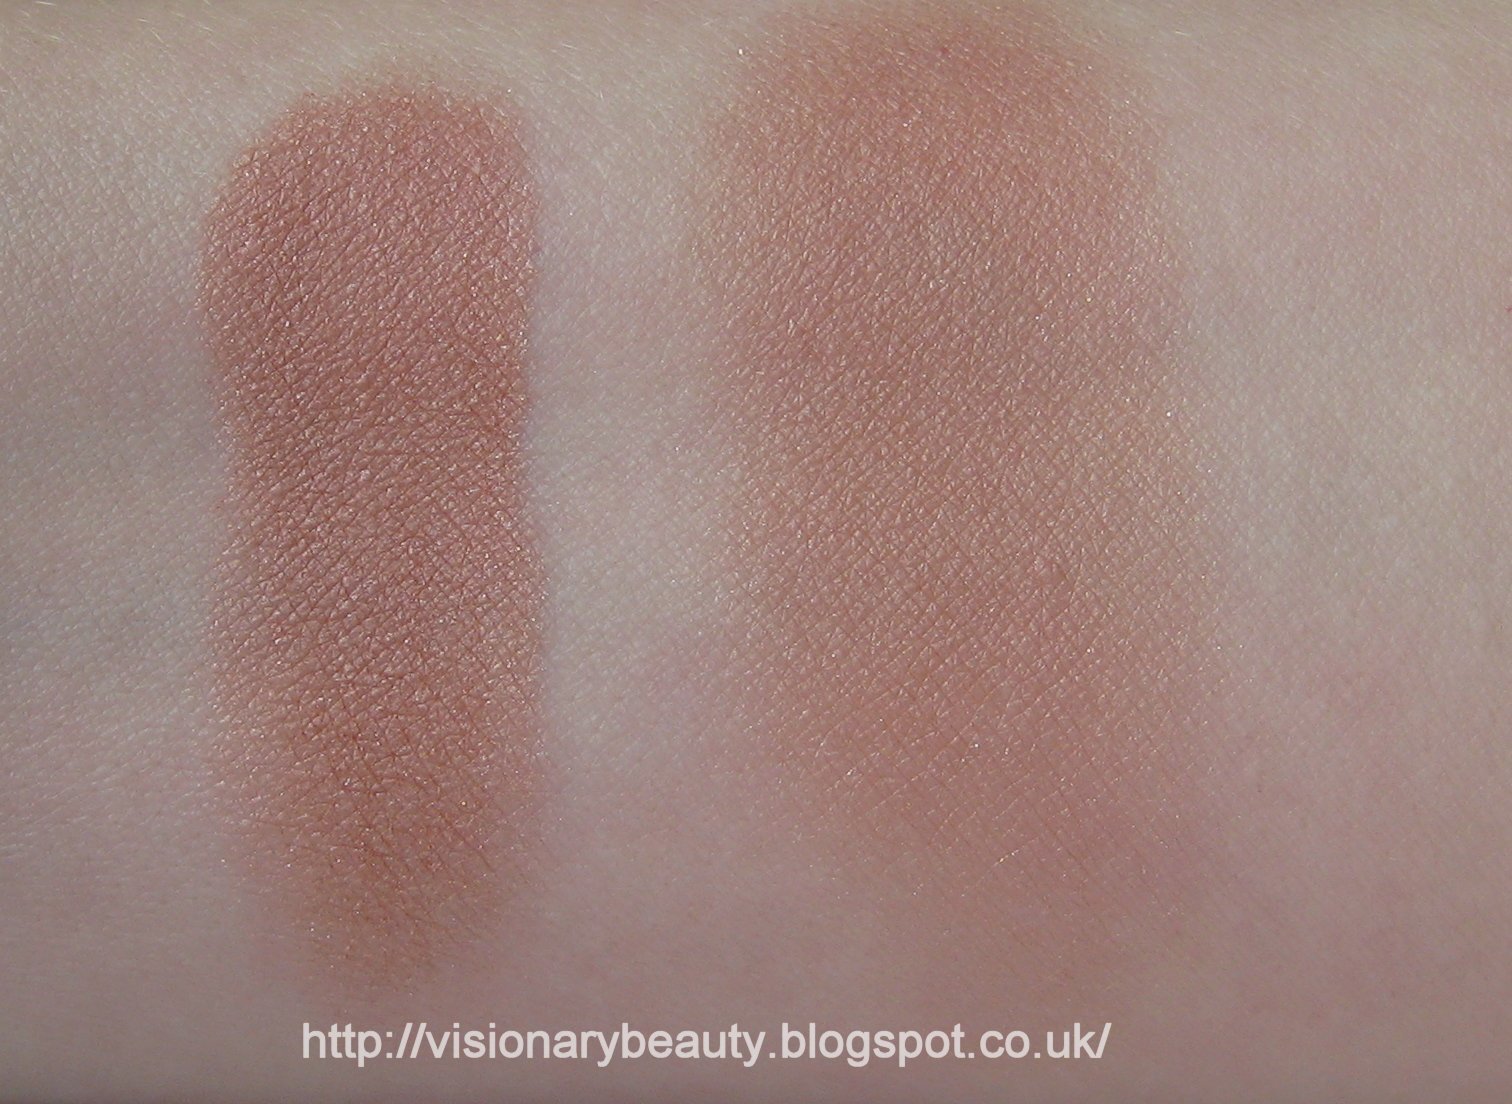 Chanel Frivole Joues Contraste Powder Blush Swatches & Review - Spring 2013  - Blushing Noir